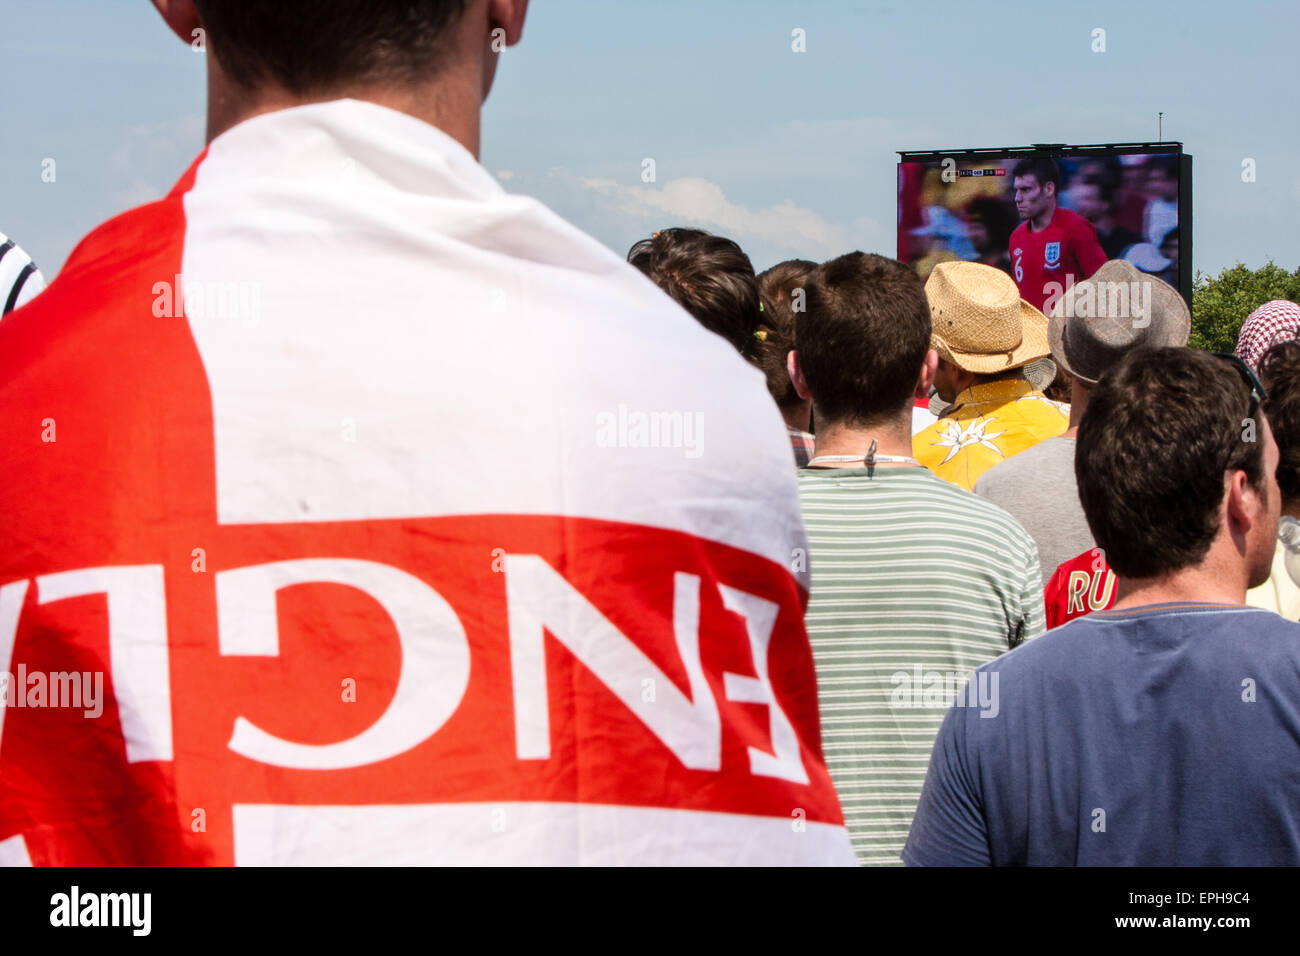 Thousands of football fans watched the football World Cup on giant screens area Glastonbury Festival/ 'Glasto' held on working f Stock Photo